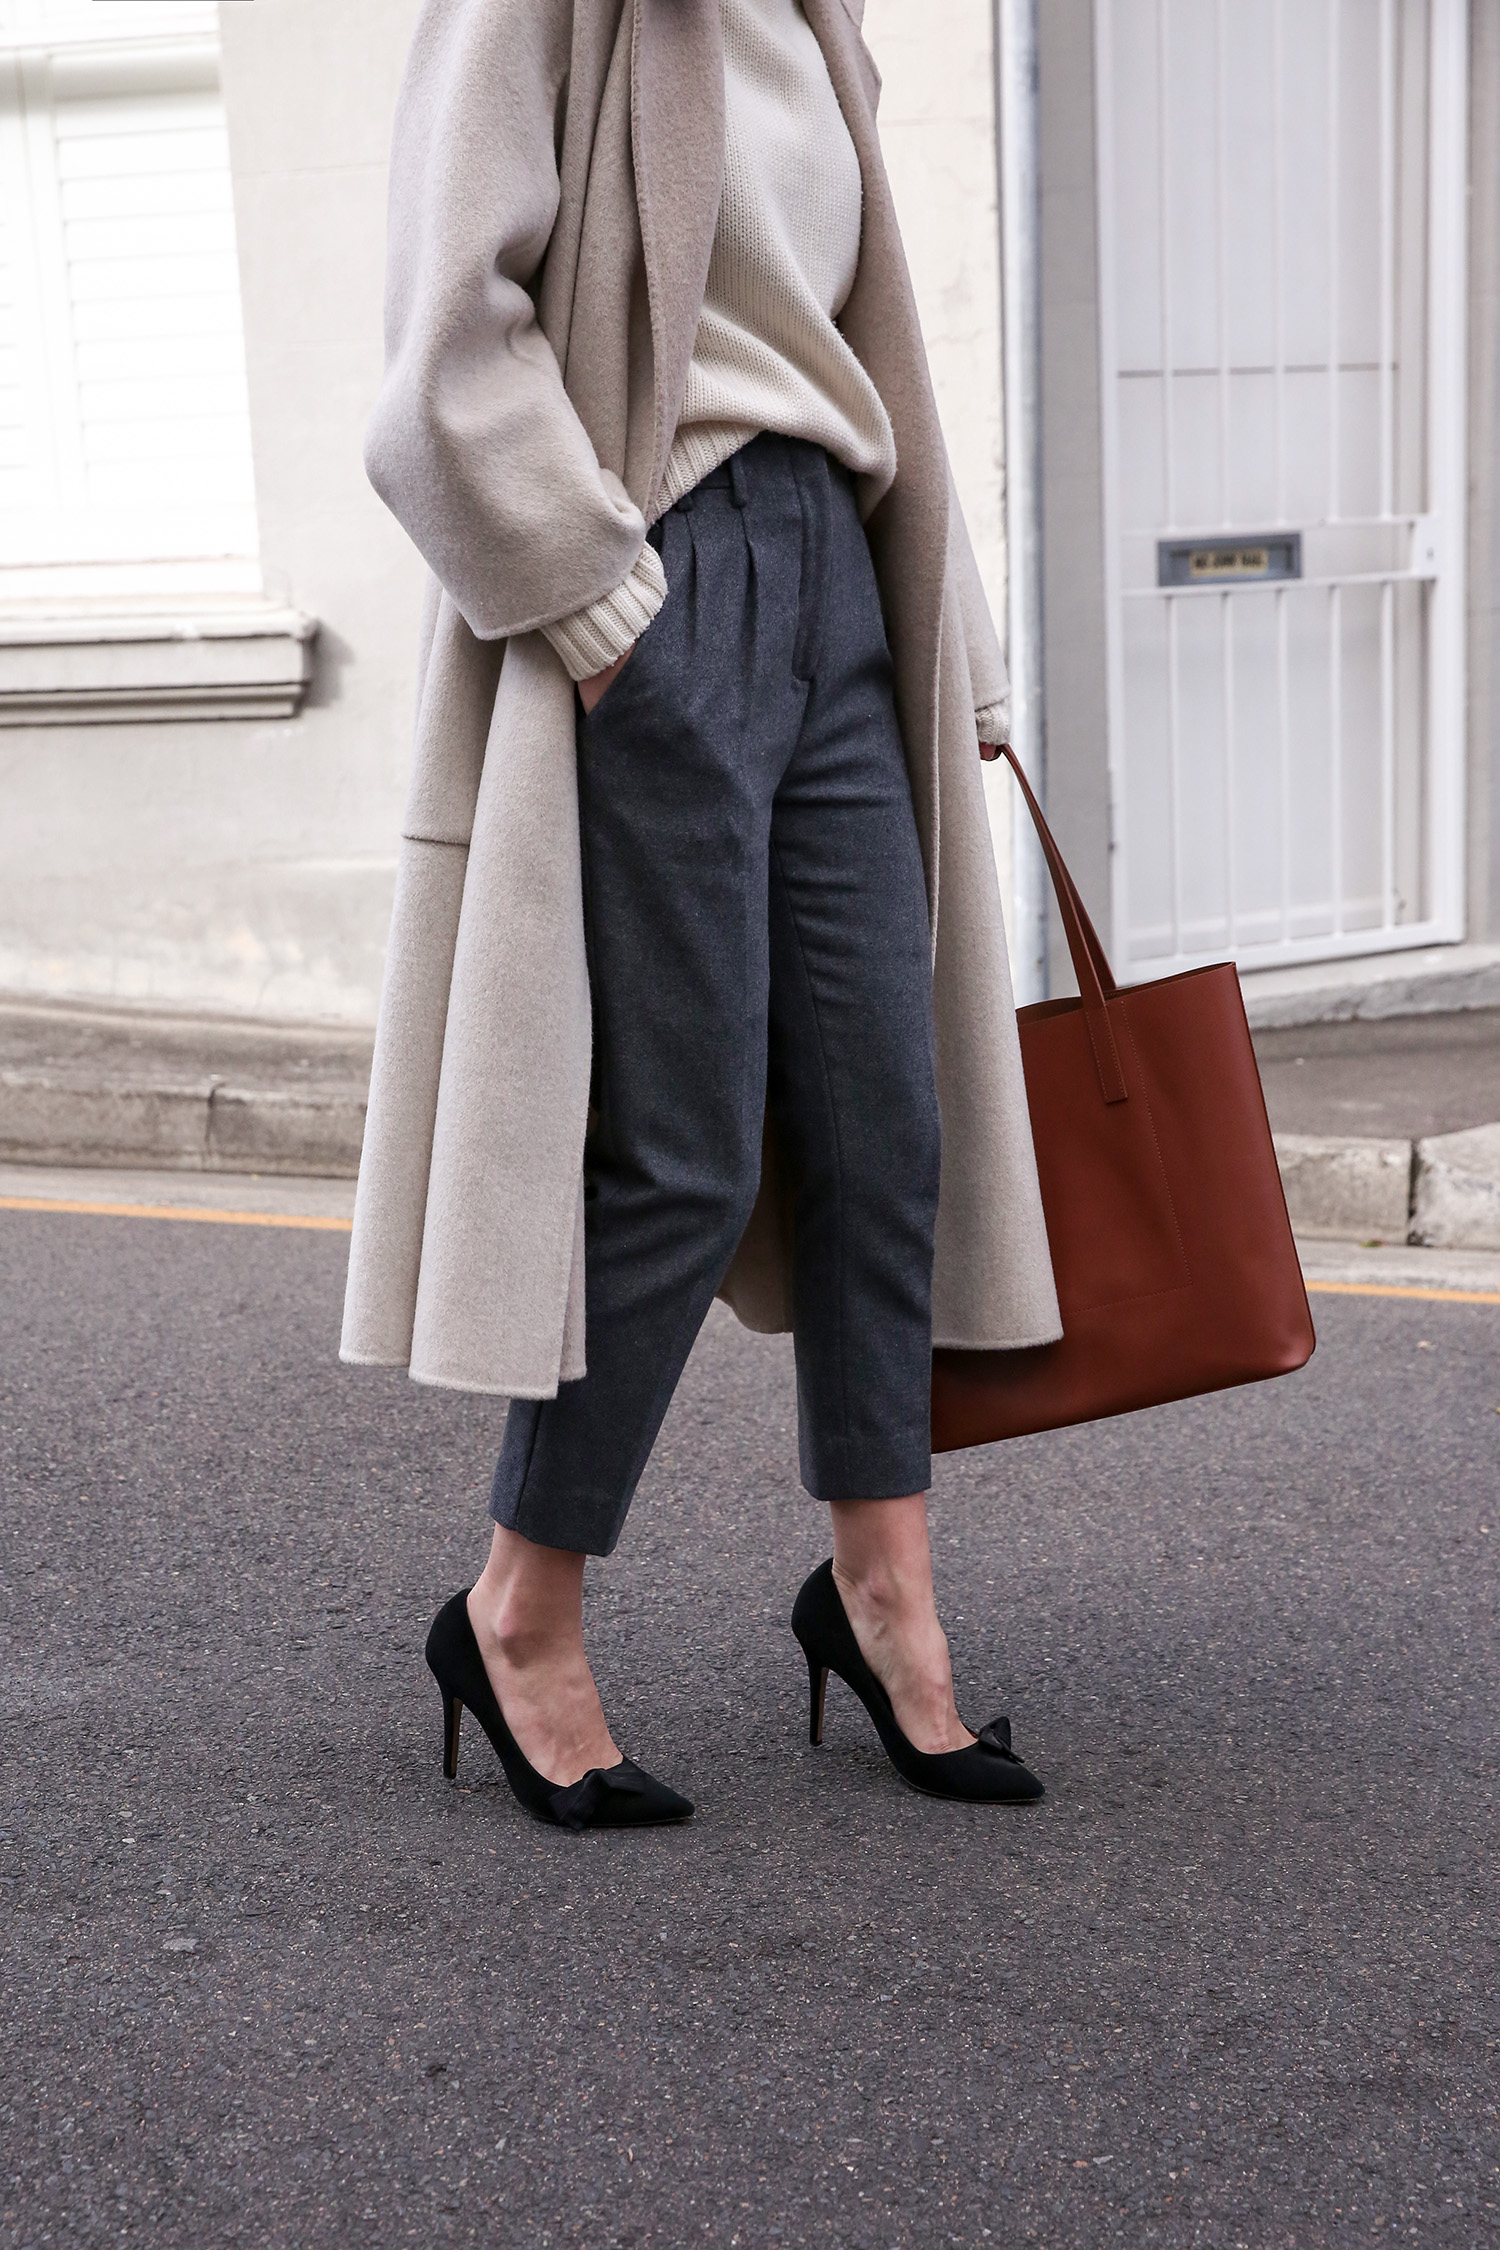 Autumn and Winter Work Wardrobe Essentials You Need in Your Closet